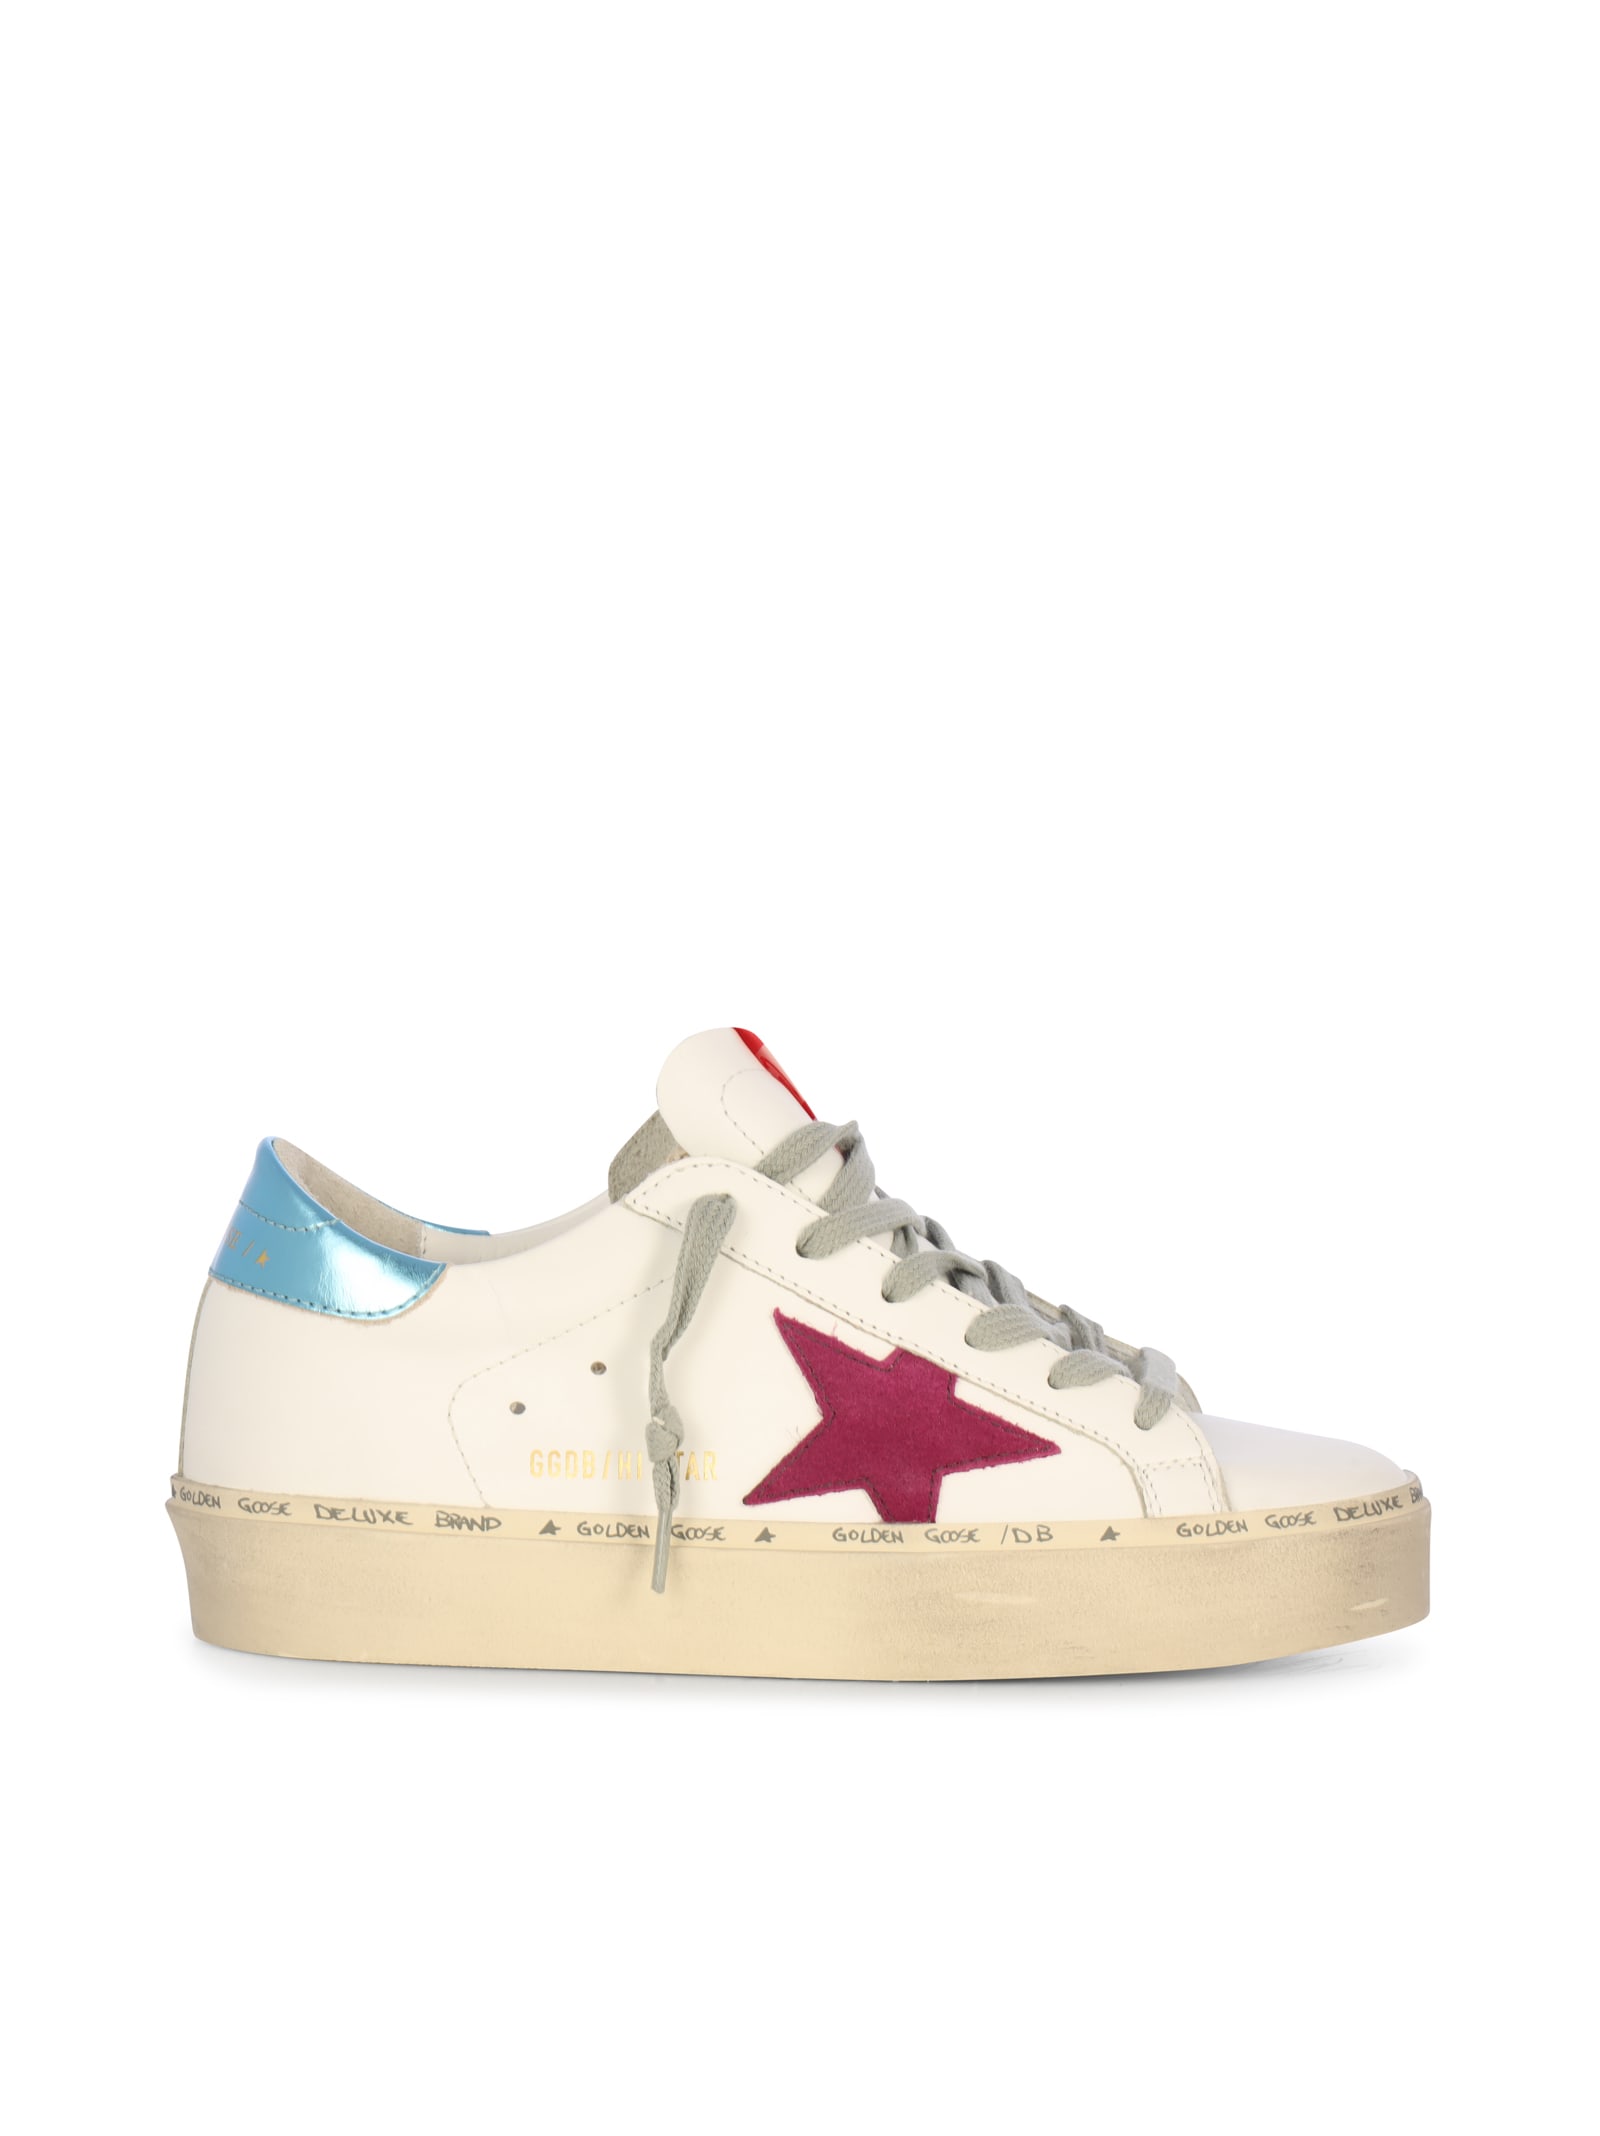 Buy Golden Goose Hi Star Leather Upper Suede Star Laminated Heel online, shop Golden Goose shoes with free shipping